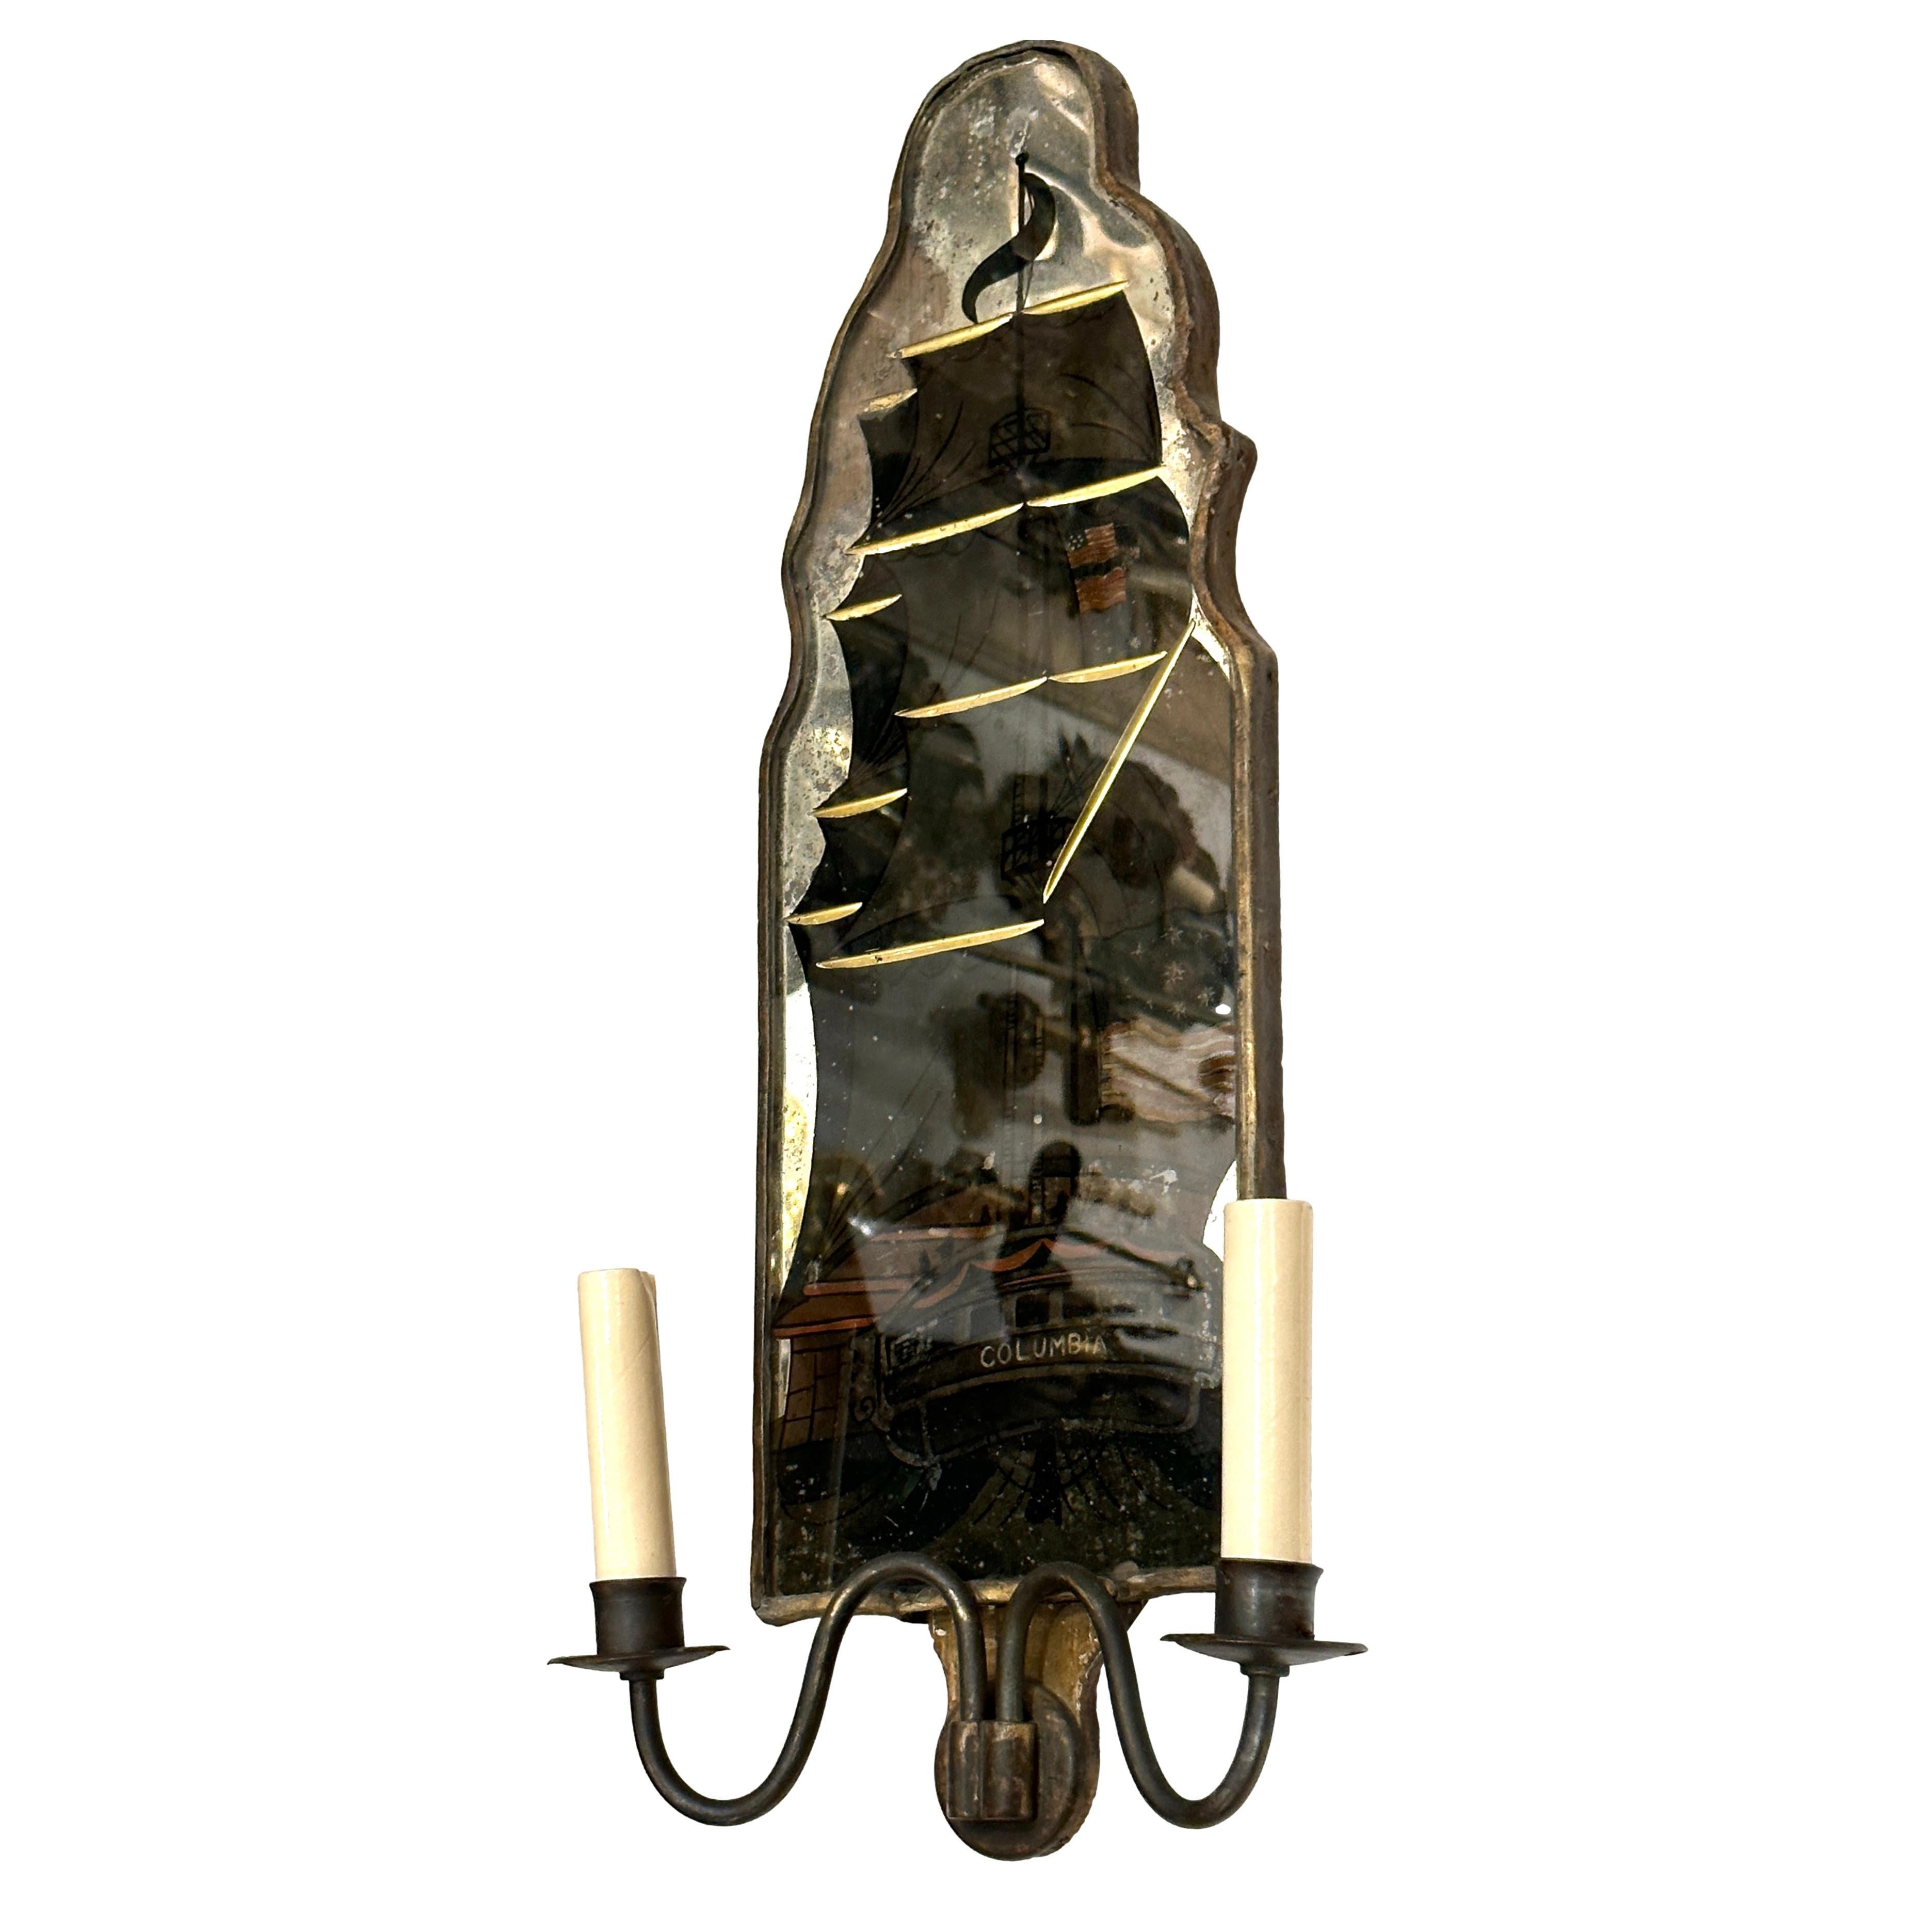 A pair of circa 1920’s American mirrored sconces with etched and reverse painted ships.

Measurements:
Height: 21.75″
width: 10″ (widest point from arm to arm)
Depth: 5″